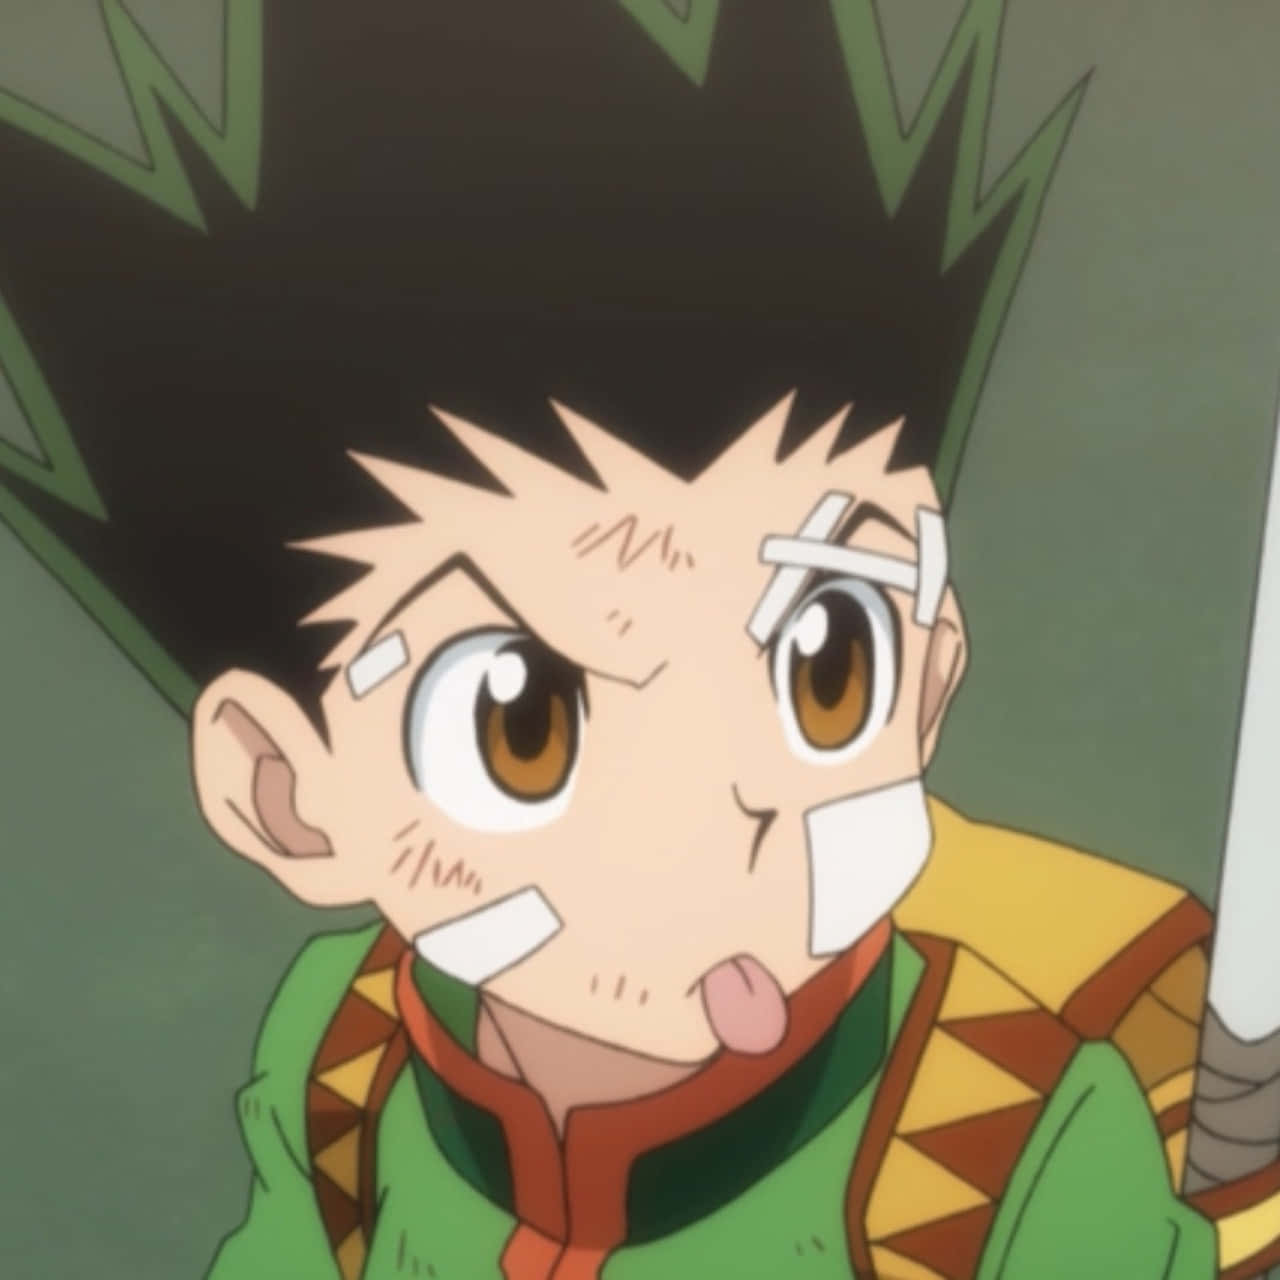 Download Gon Sticking Tongue Out Hxh Pfp Wallpaper